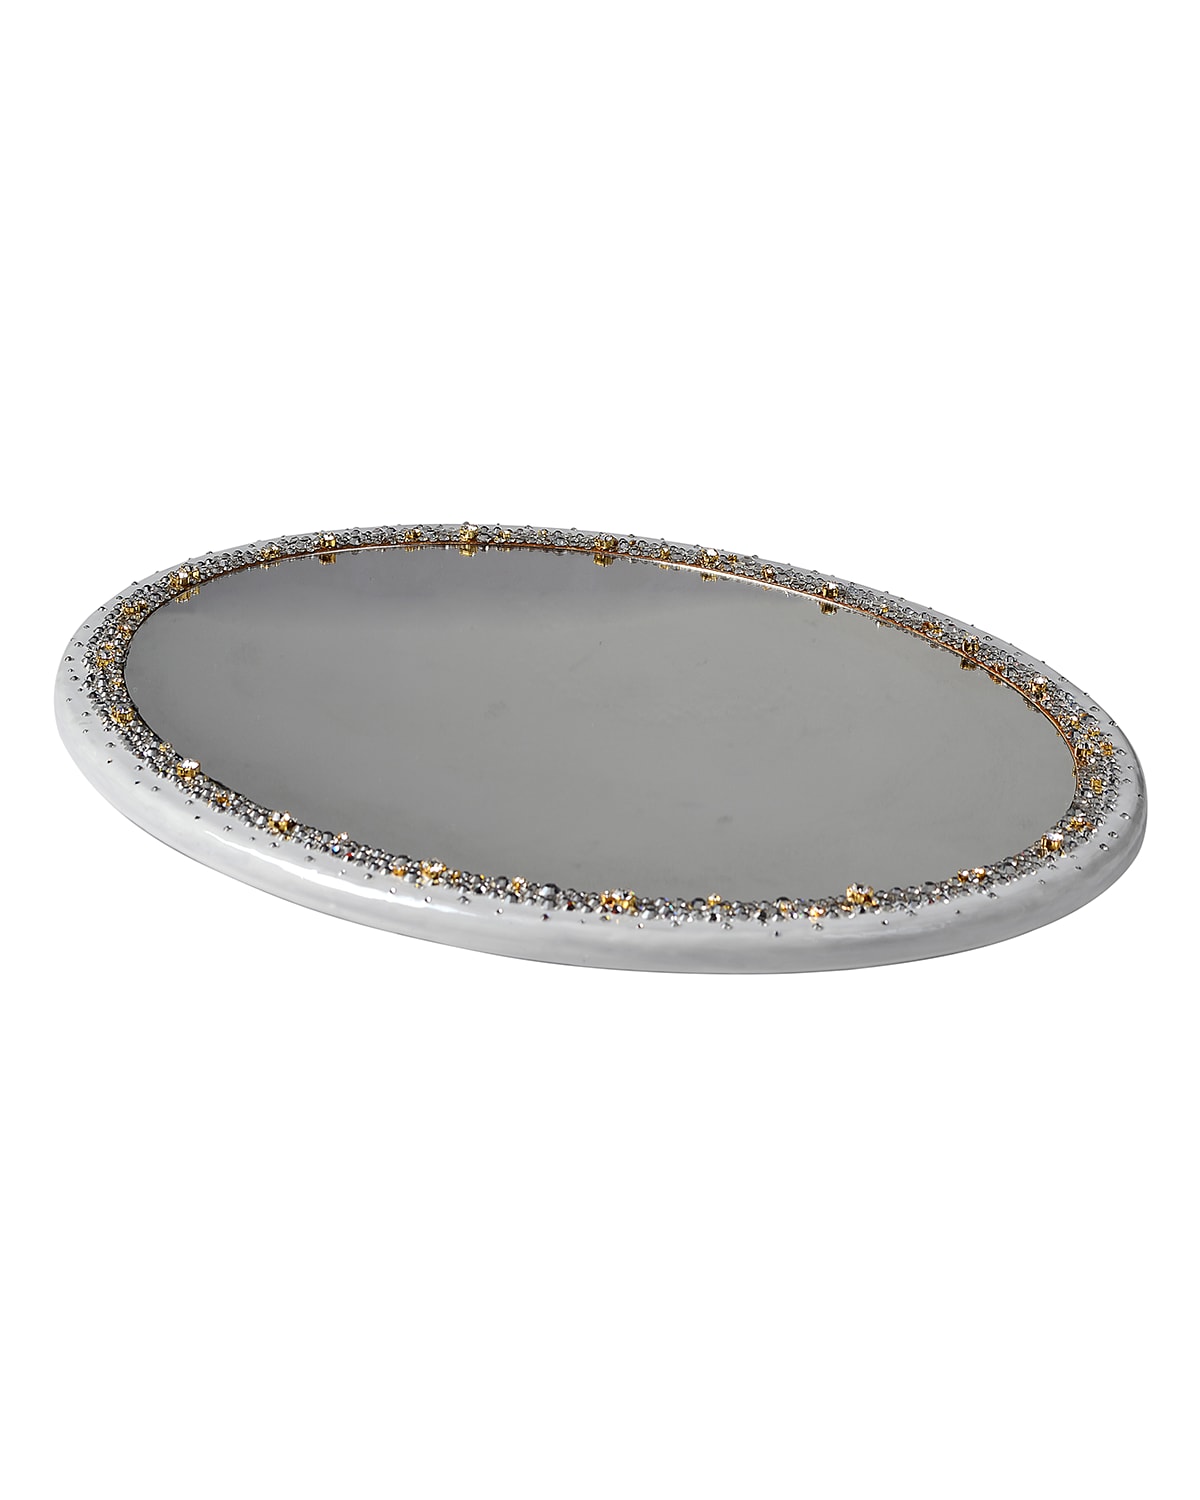 Mike & Ally Duchess Oval Mirrored Vanity Tray In White Pattern